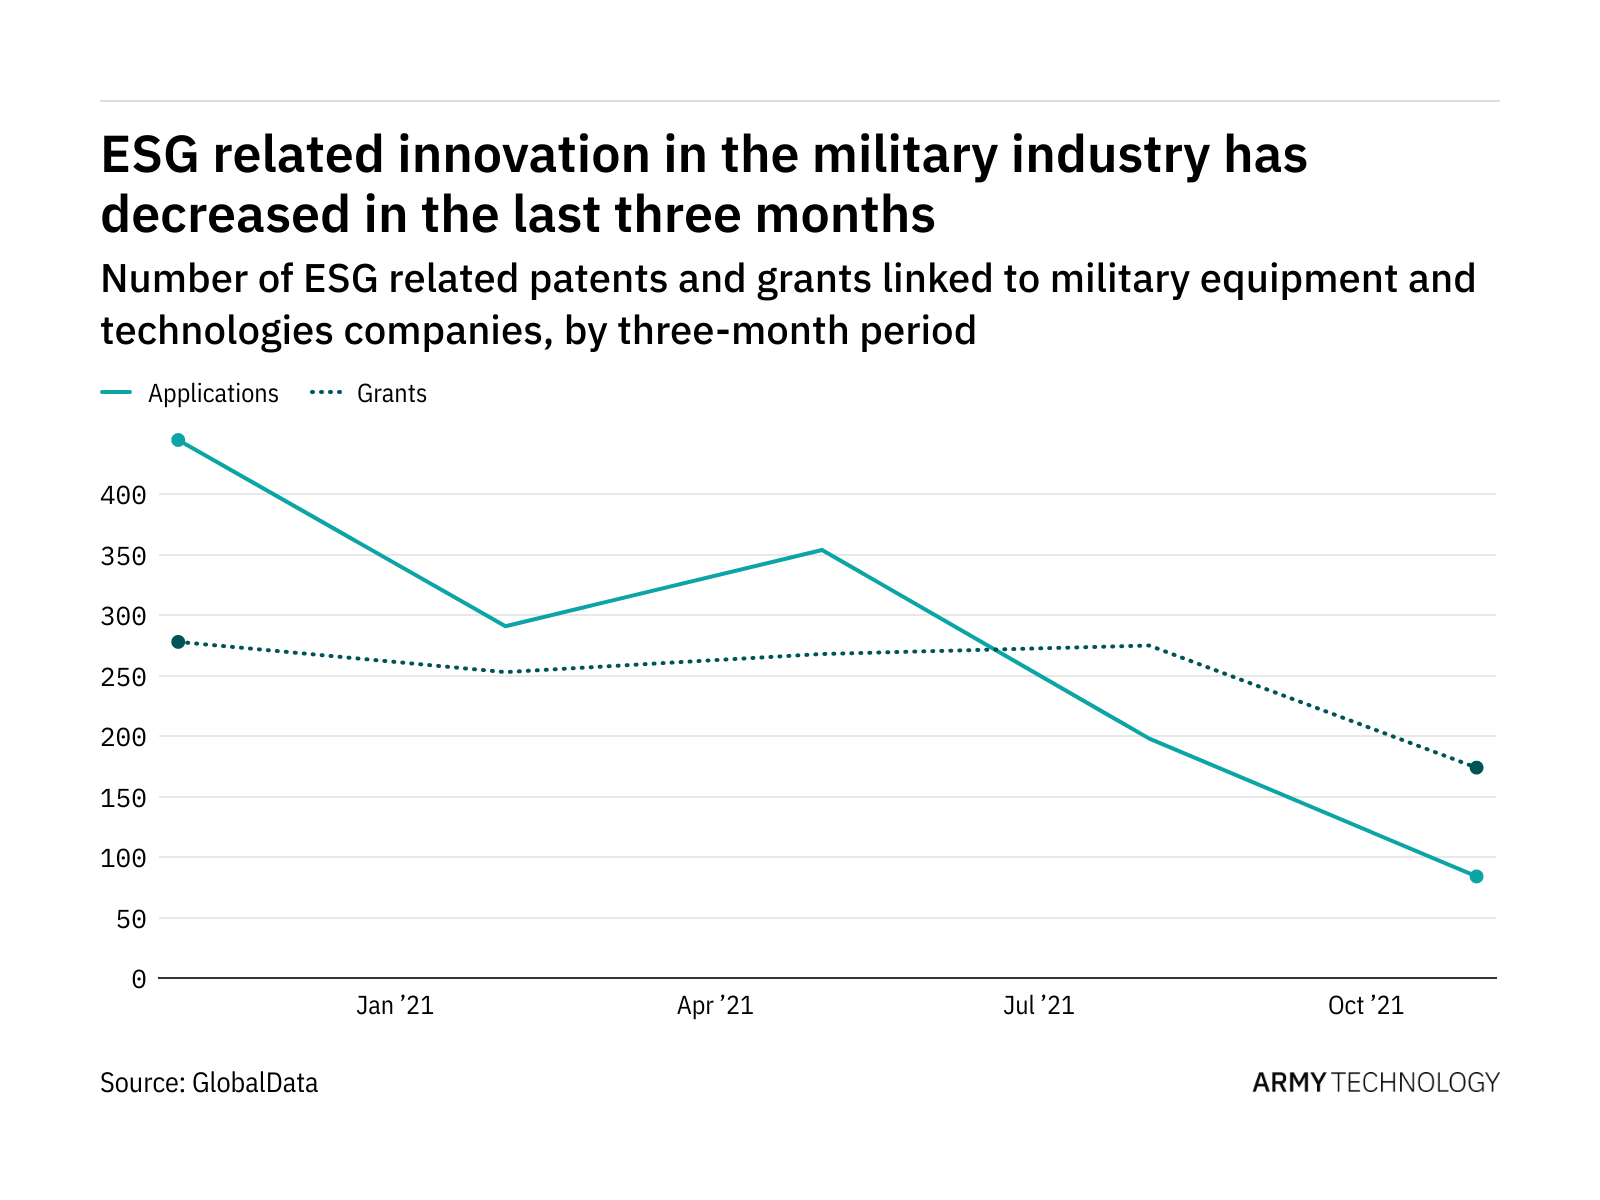 Environmental, social, and governance innovation among military industry companies has dropped off in the last year